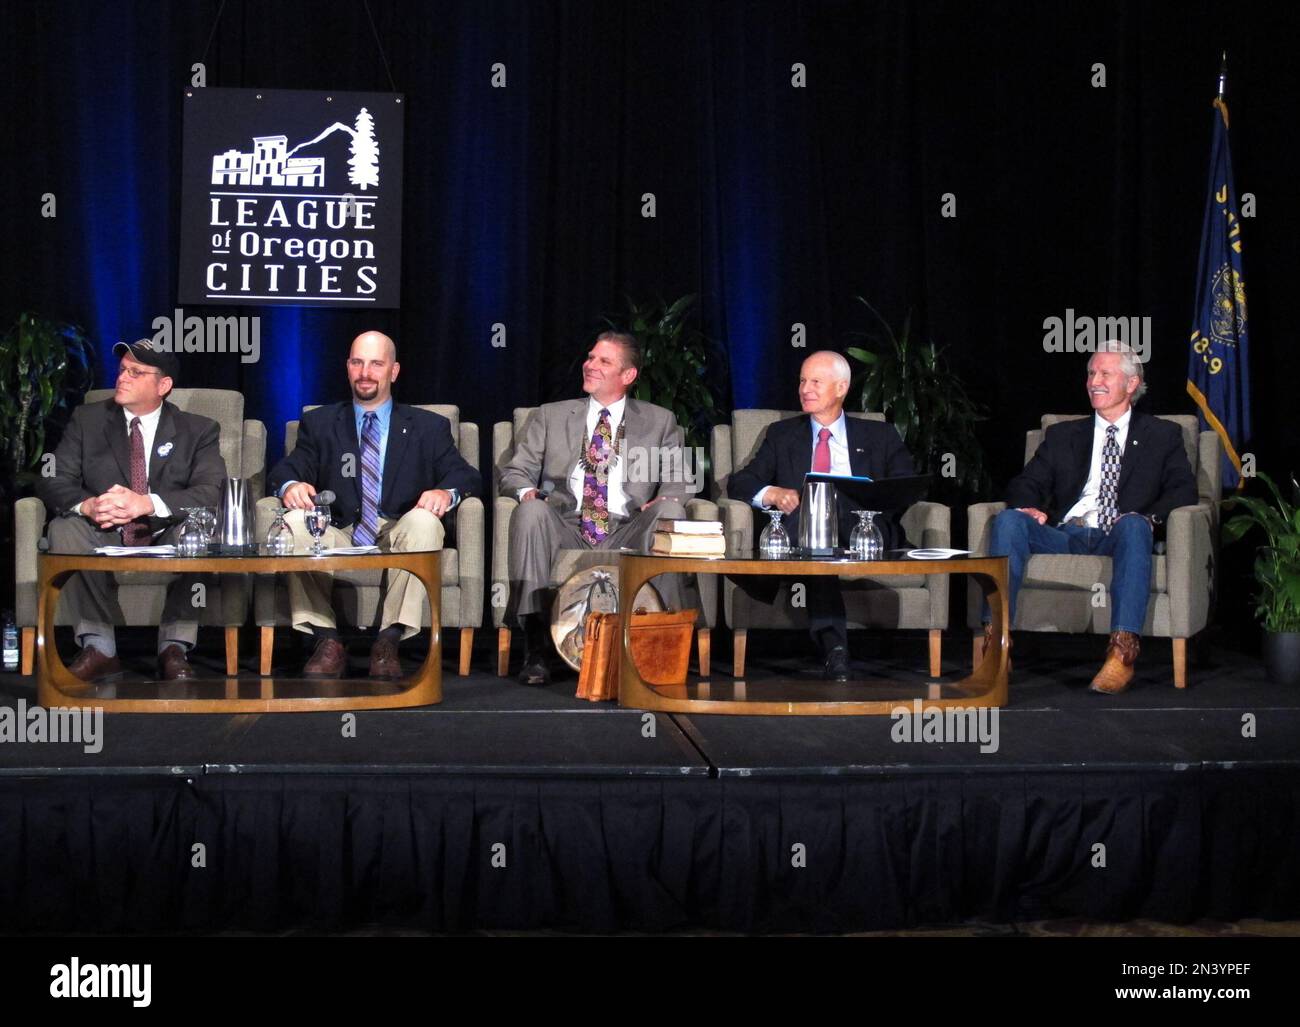 Chris Henry, left, Jason Levin, Aaron Auer, Dennis Richardson and Gov. John Kitzhaber share the stage Saturday at a gubernatorial debate sponsored by the League of Oregon Cities, Sept. 27, 2014 in Eugene, Ore. (AP Photo/Jonathan J. Cooper) Stock Photo